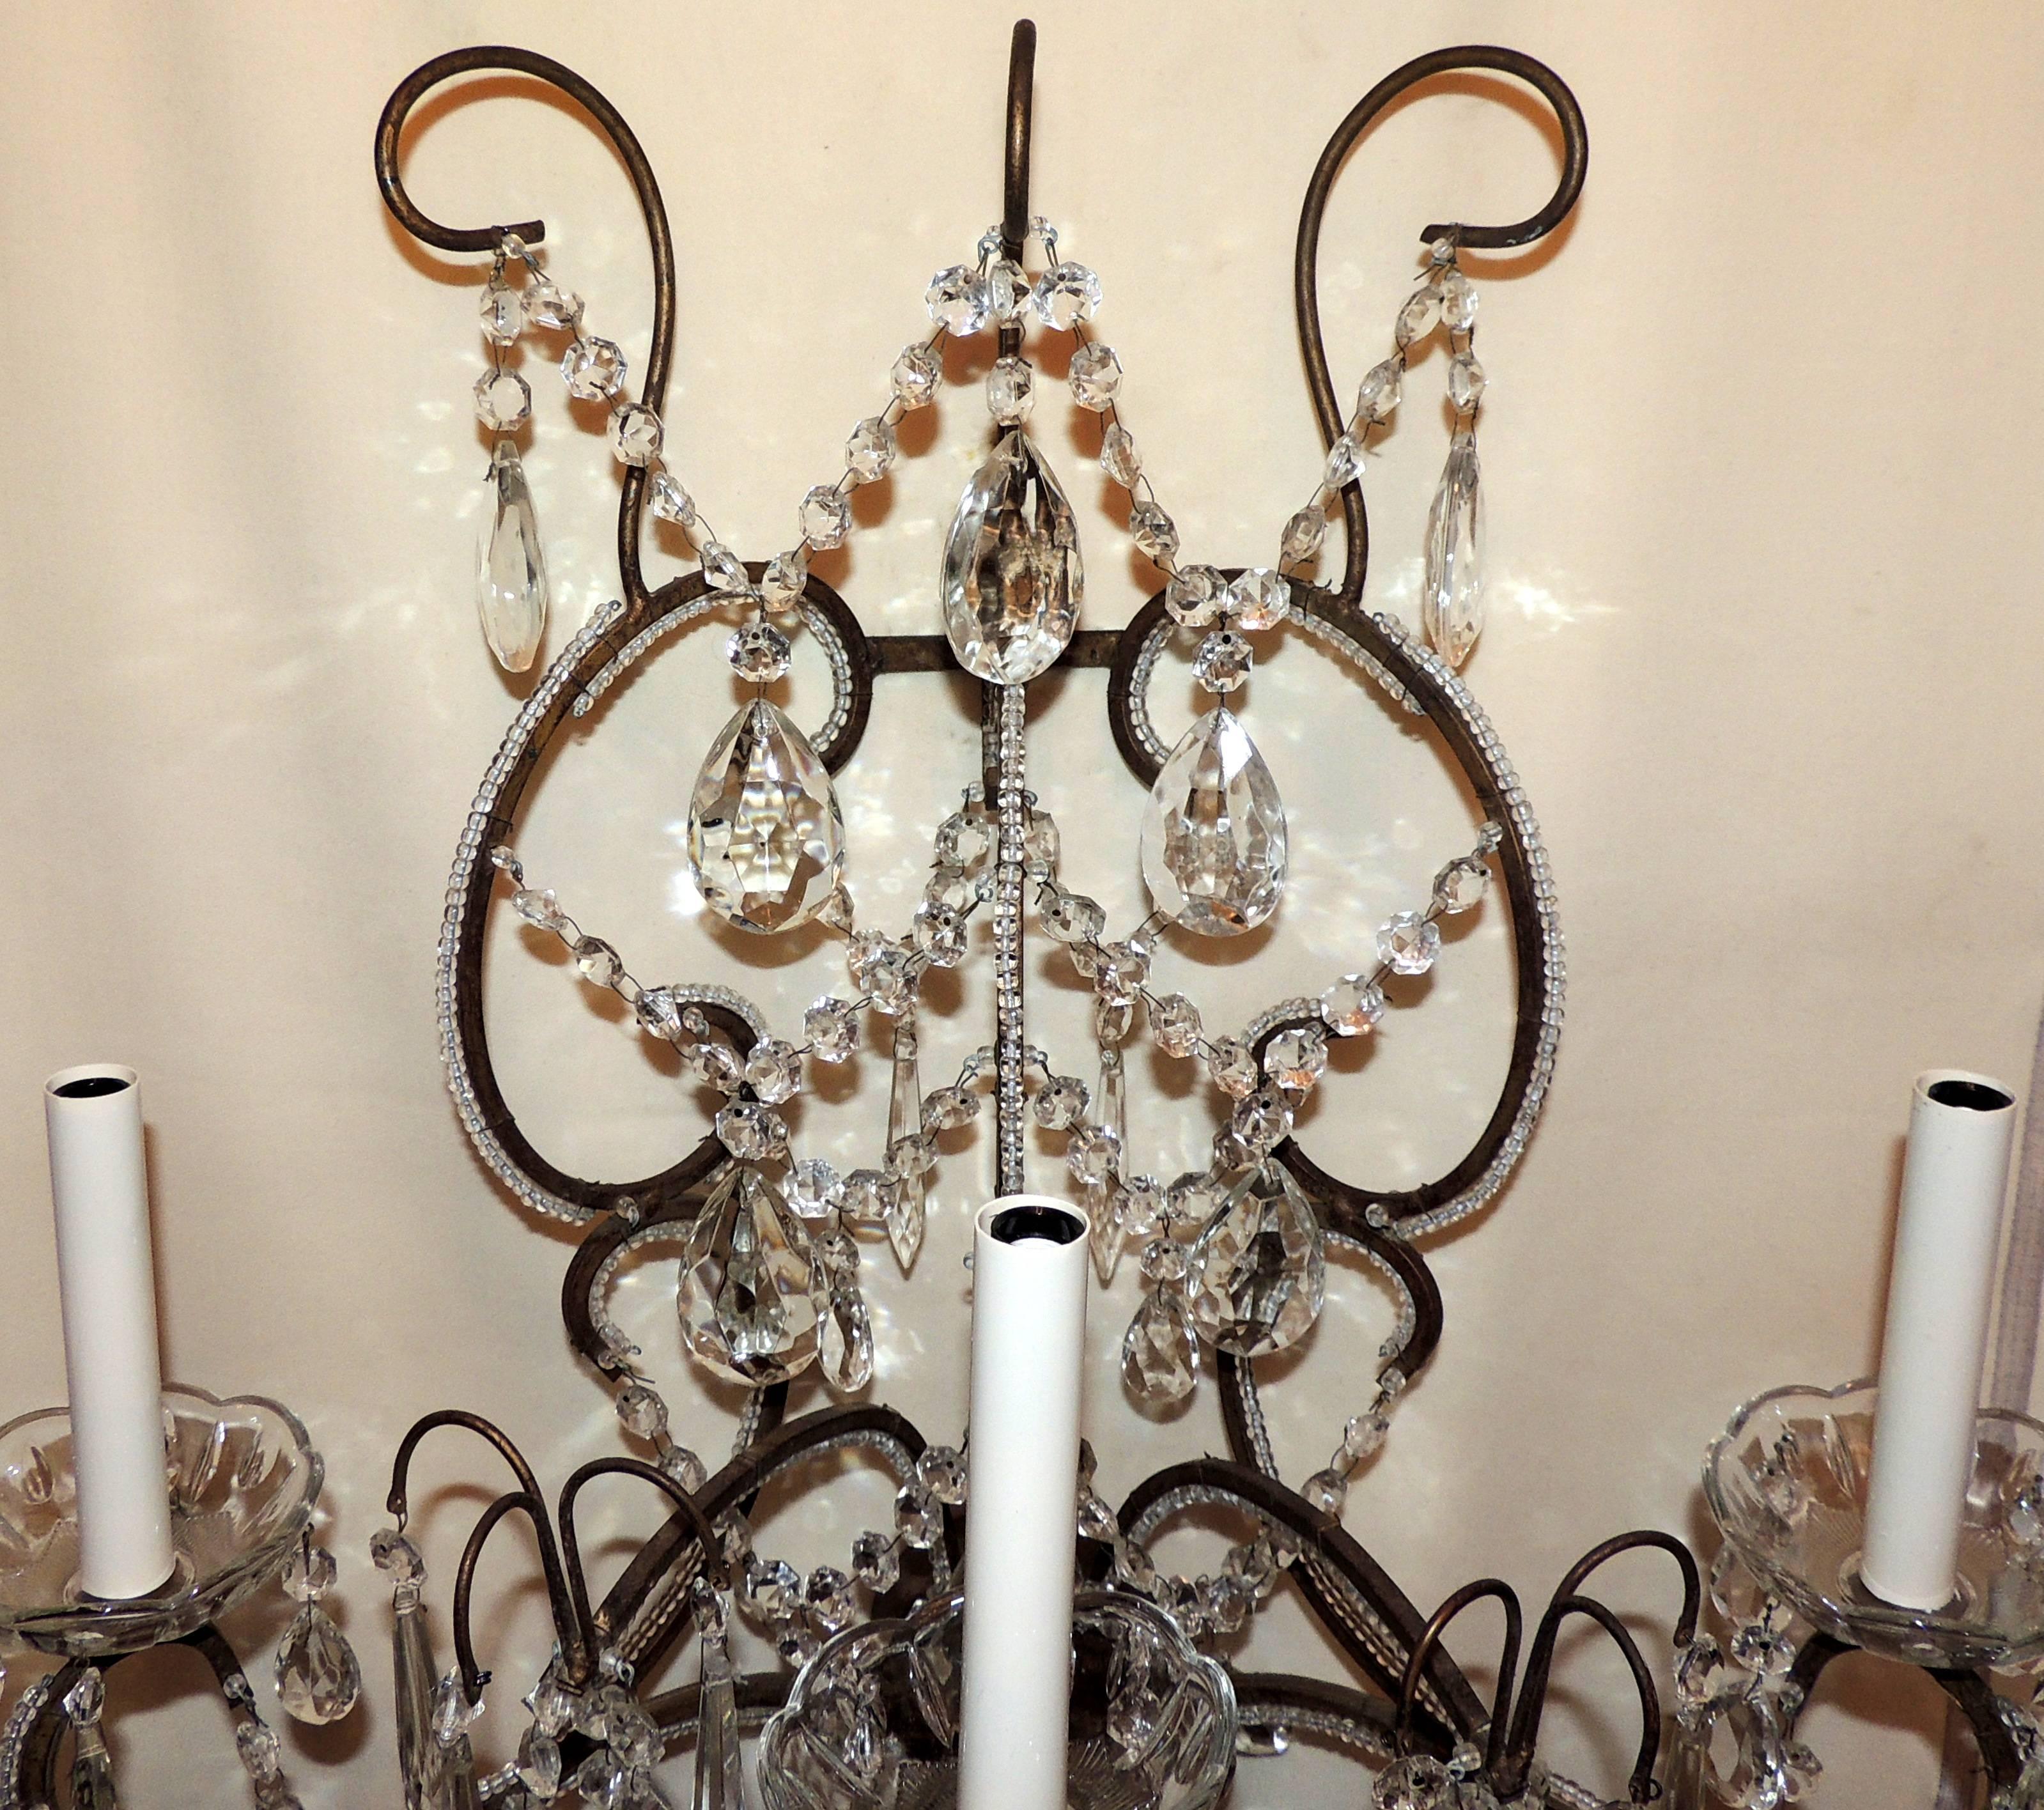 A wonderful pair of large beaded crystal swag Italian three-light wall sconces
Measures: Approximate 21 1/2